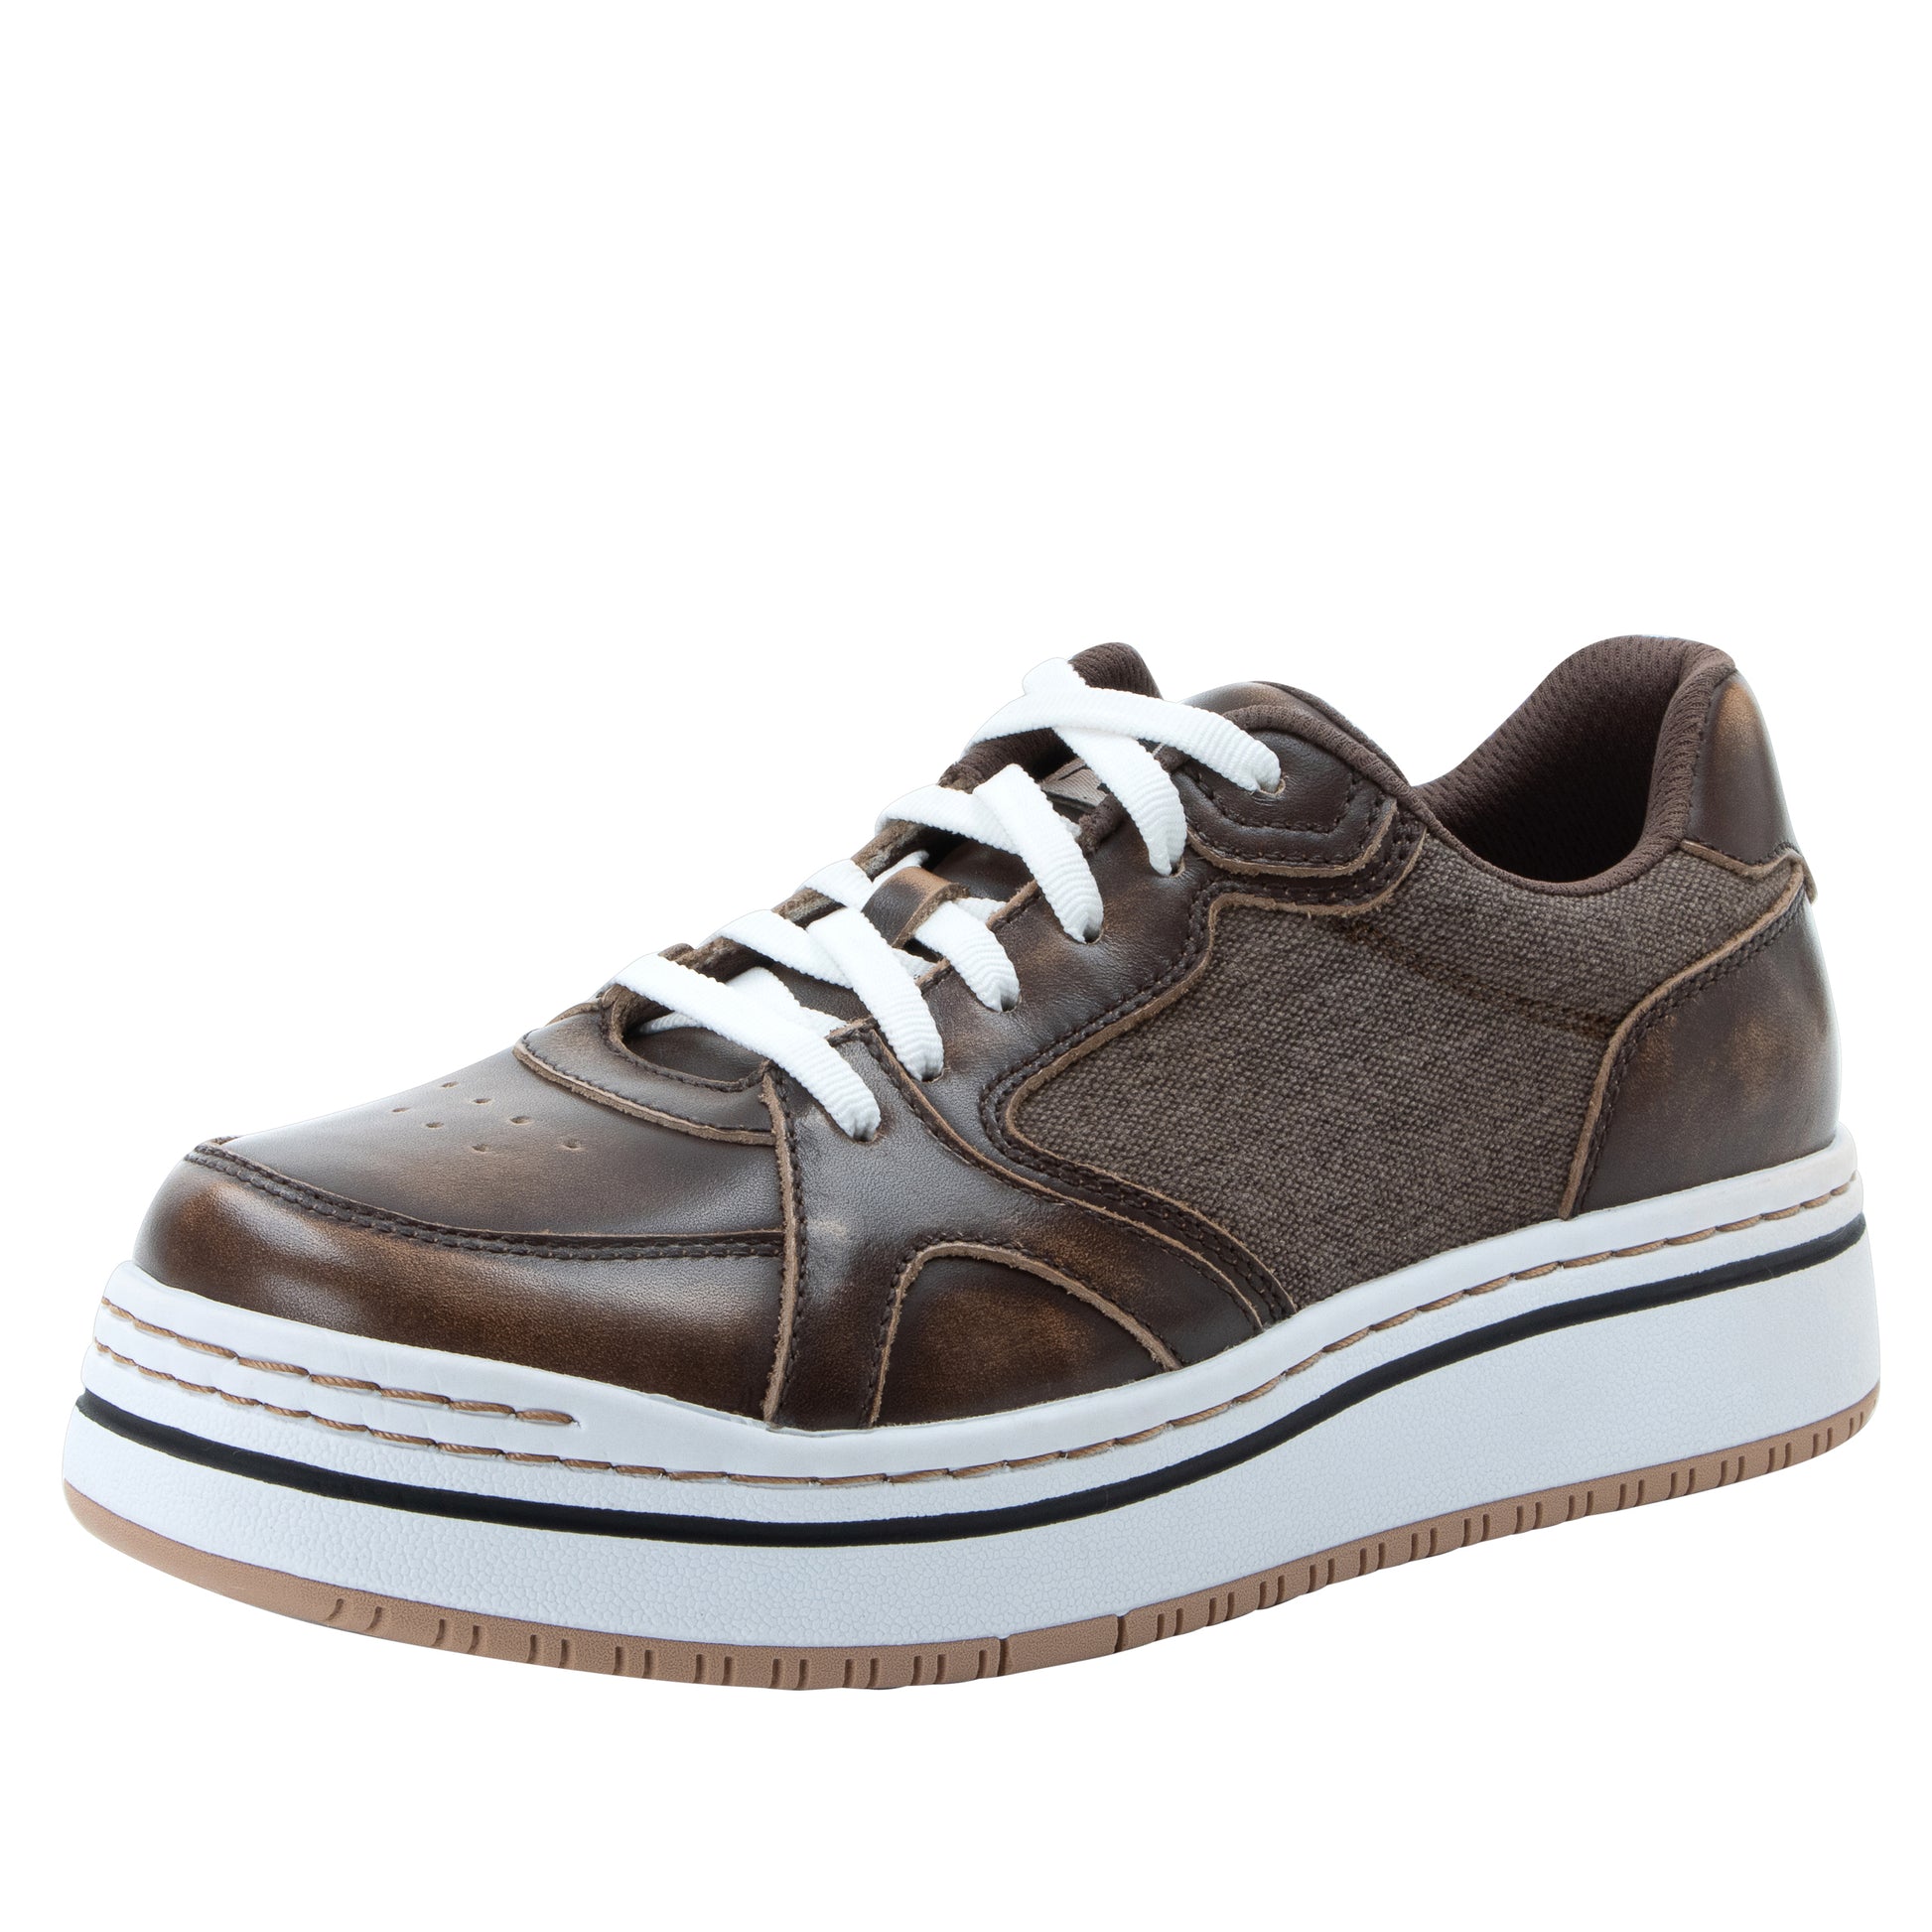 Alegria Alyster Shoe in Brown at Parker's Clothing and Shoes.